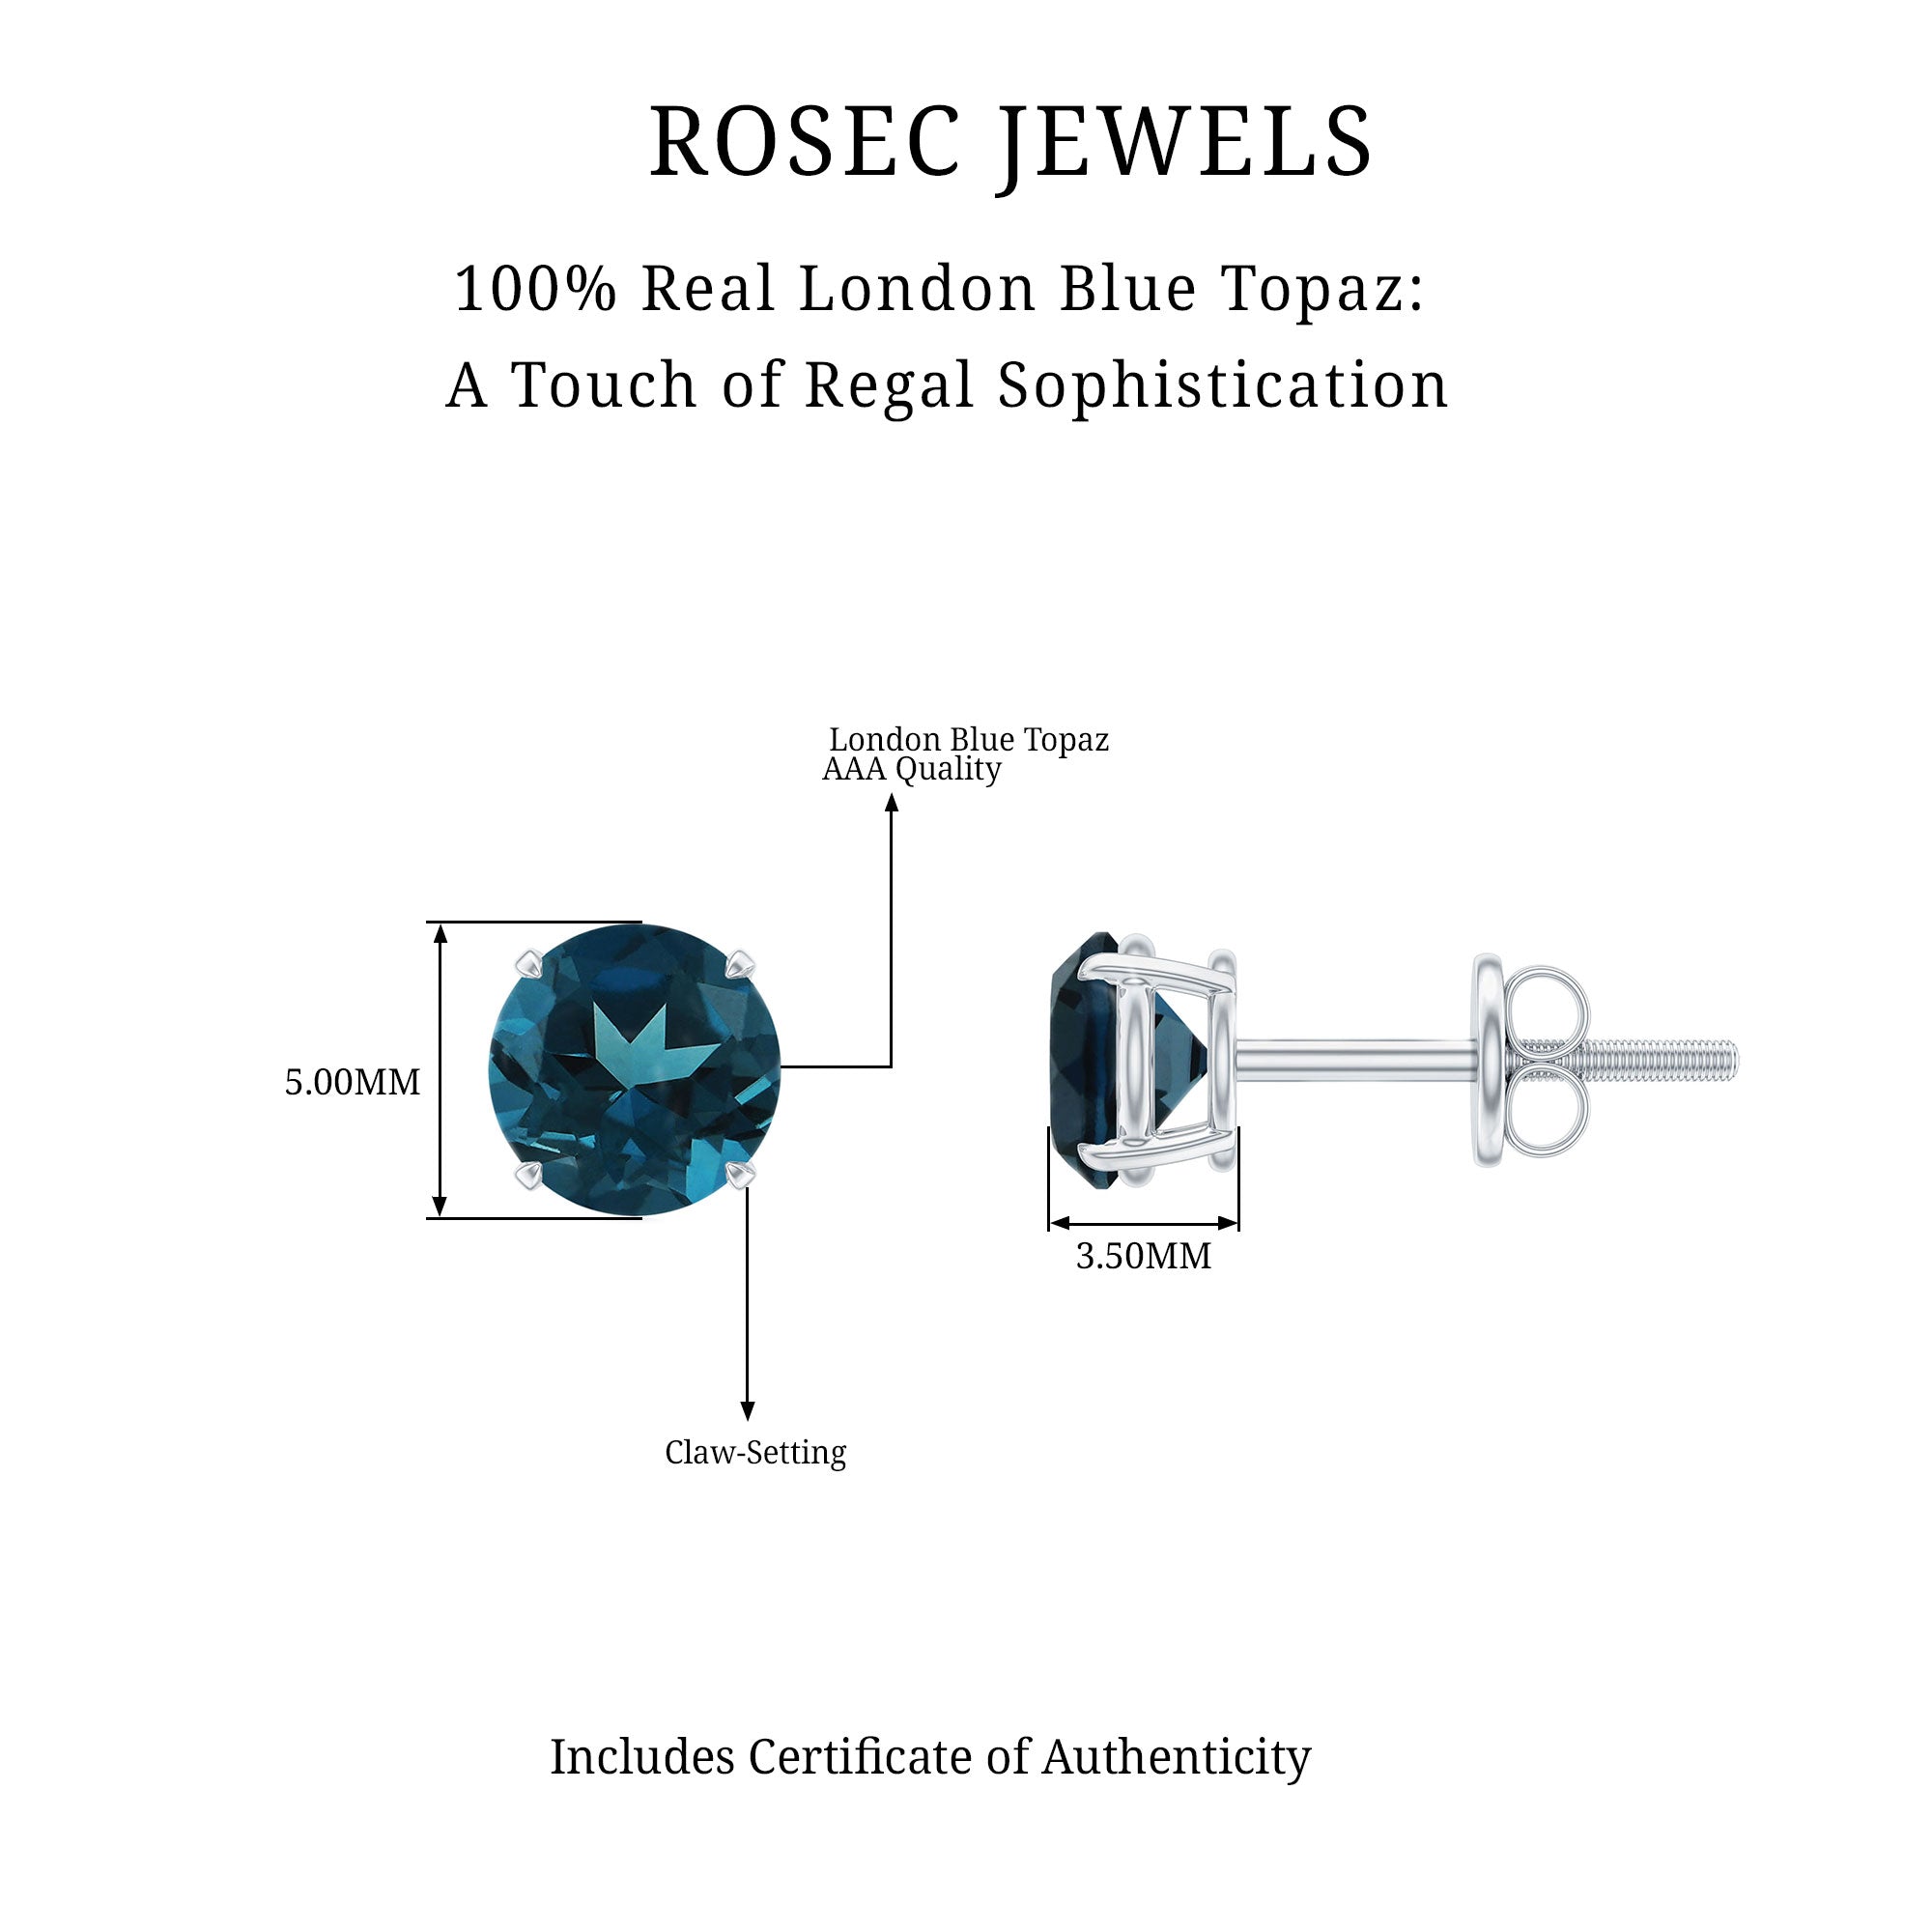 Claw Set Solitaire Stud Earrings with Round London Blue Topaz London Blue Topaz - ( AAA ) - Quality - Rosec Jewels